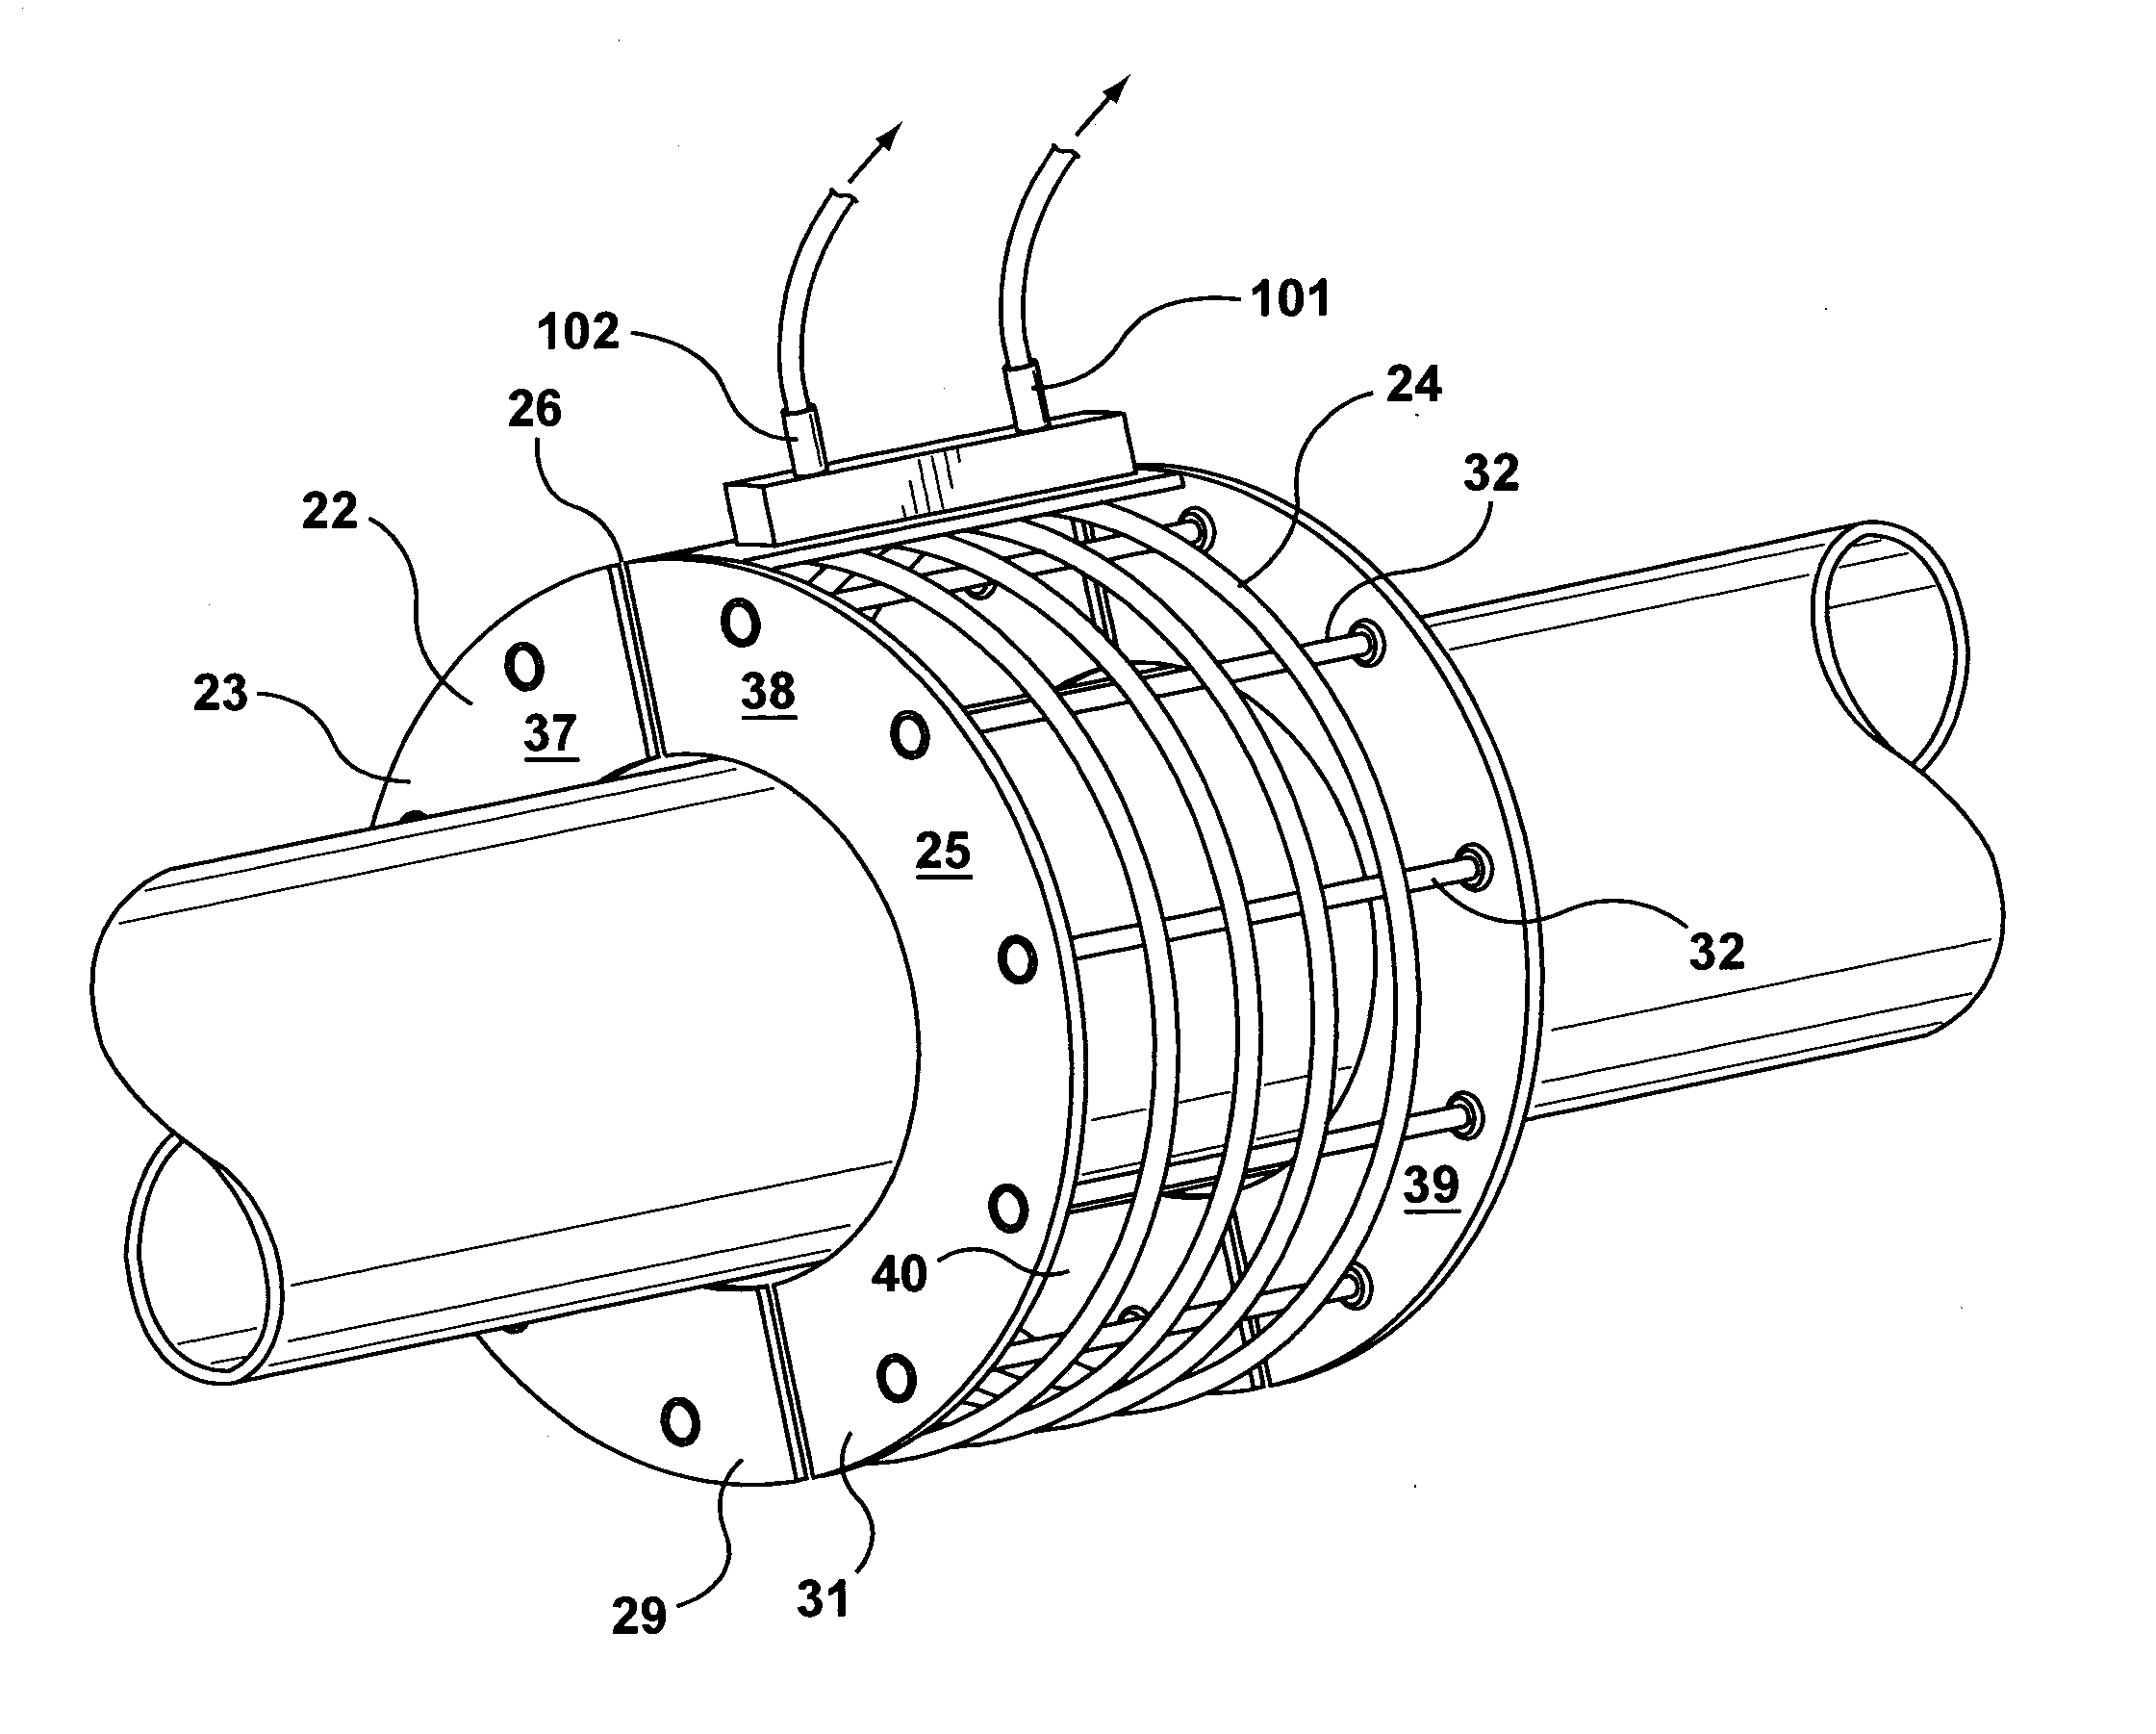 Induction heating apparatus for pipeline connections